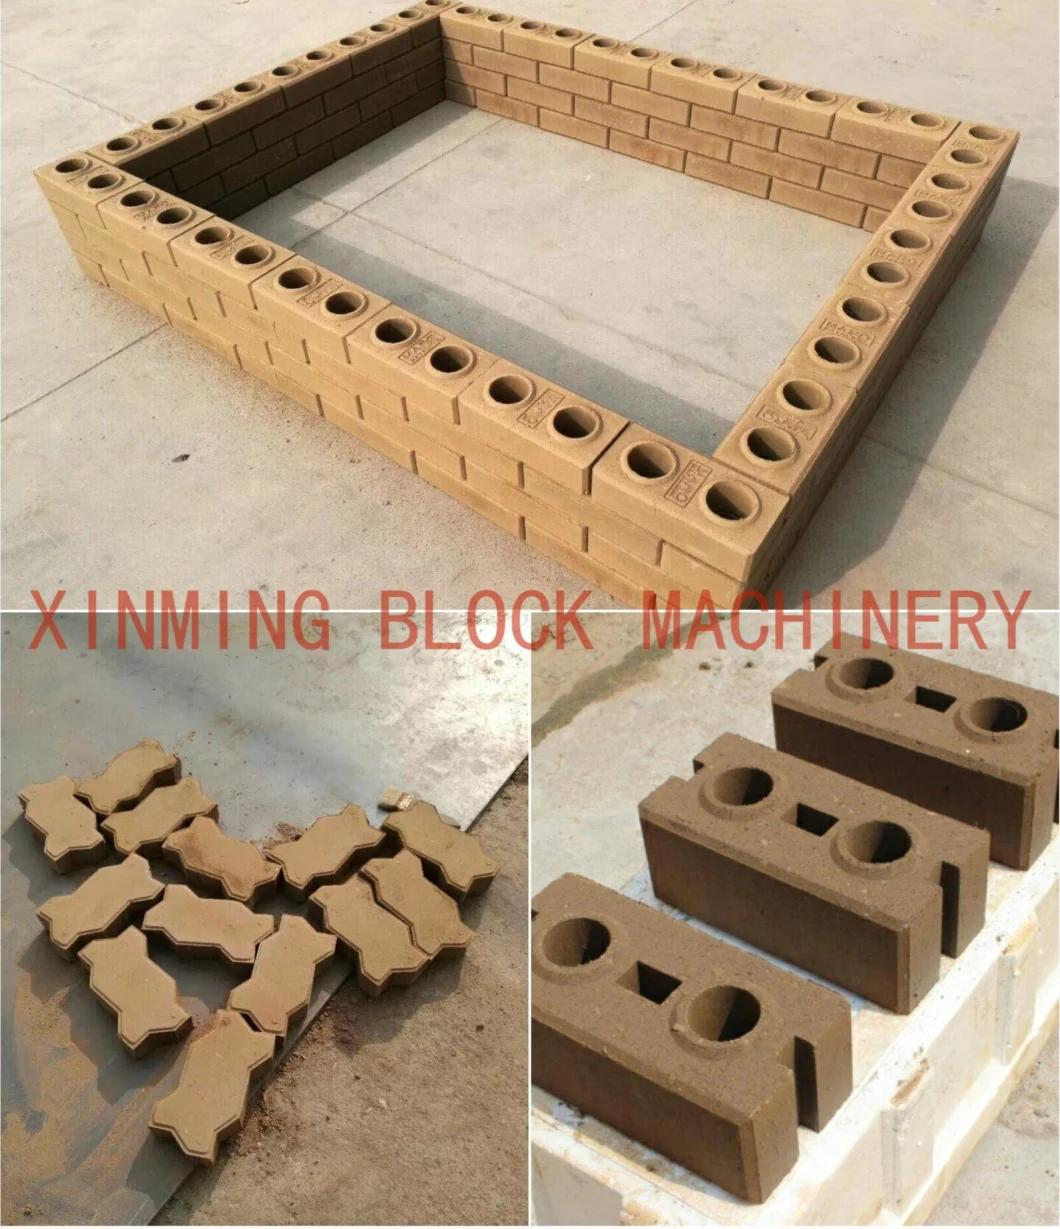 Xm 2-40 Custom Colored Block Making Machine Customed Brick Making Machine Unique for Home Use Easy to Operate